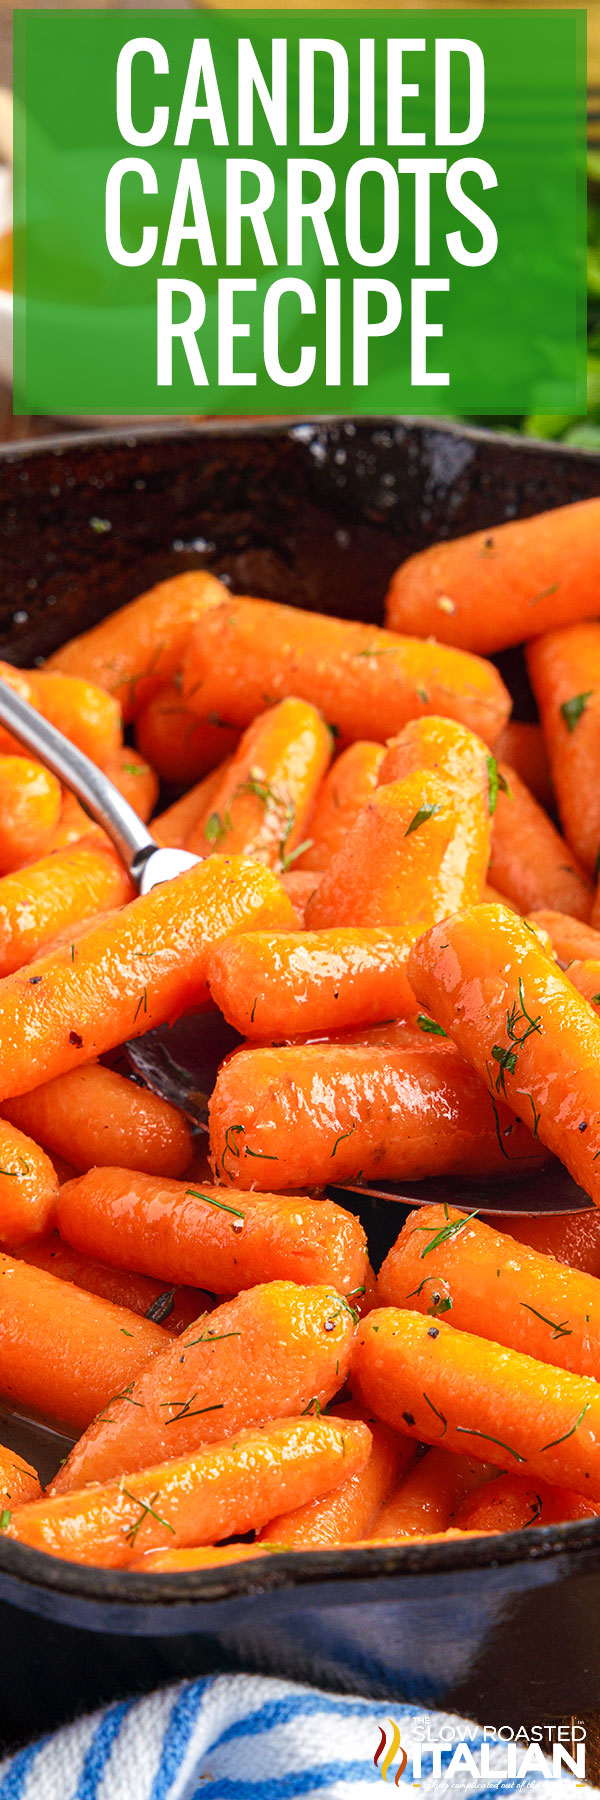 candied carrots recipe.